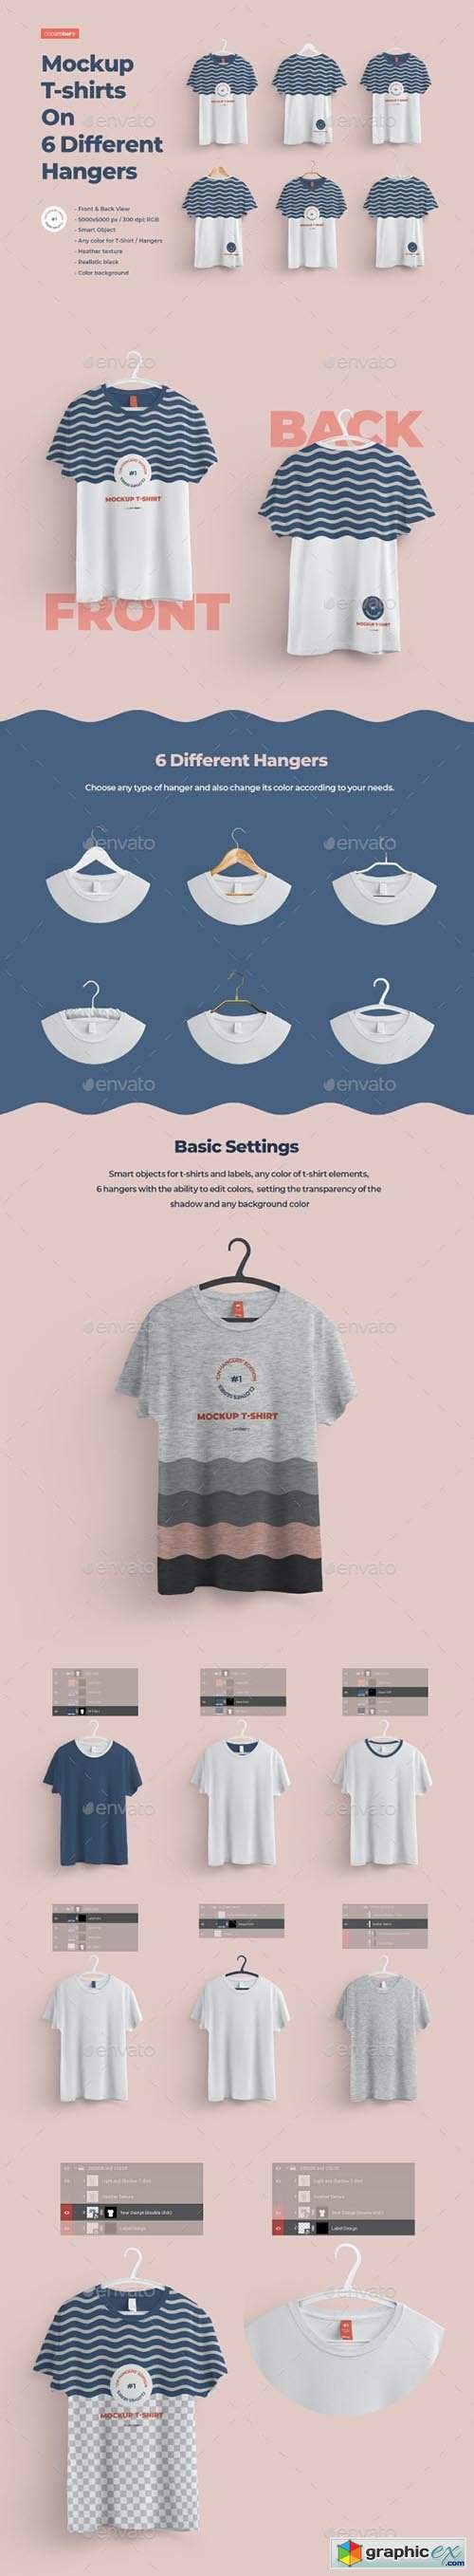 Front and Back T-shirts Mockups With 6 Different Hangers